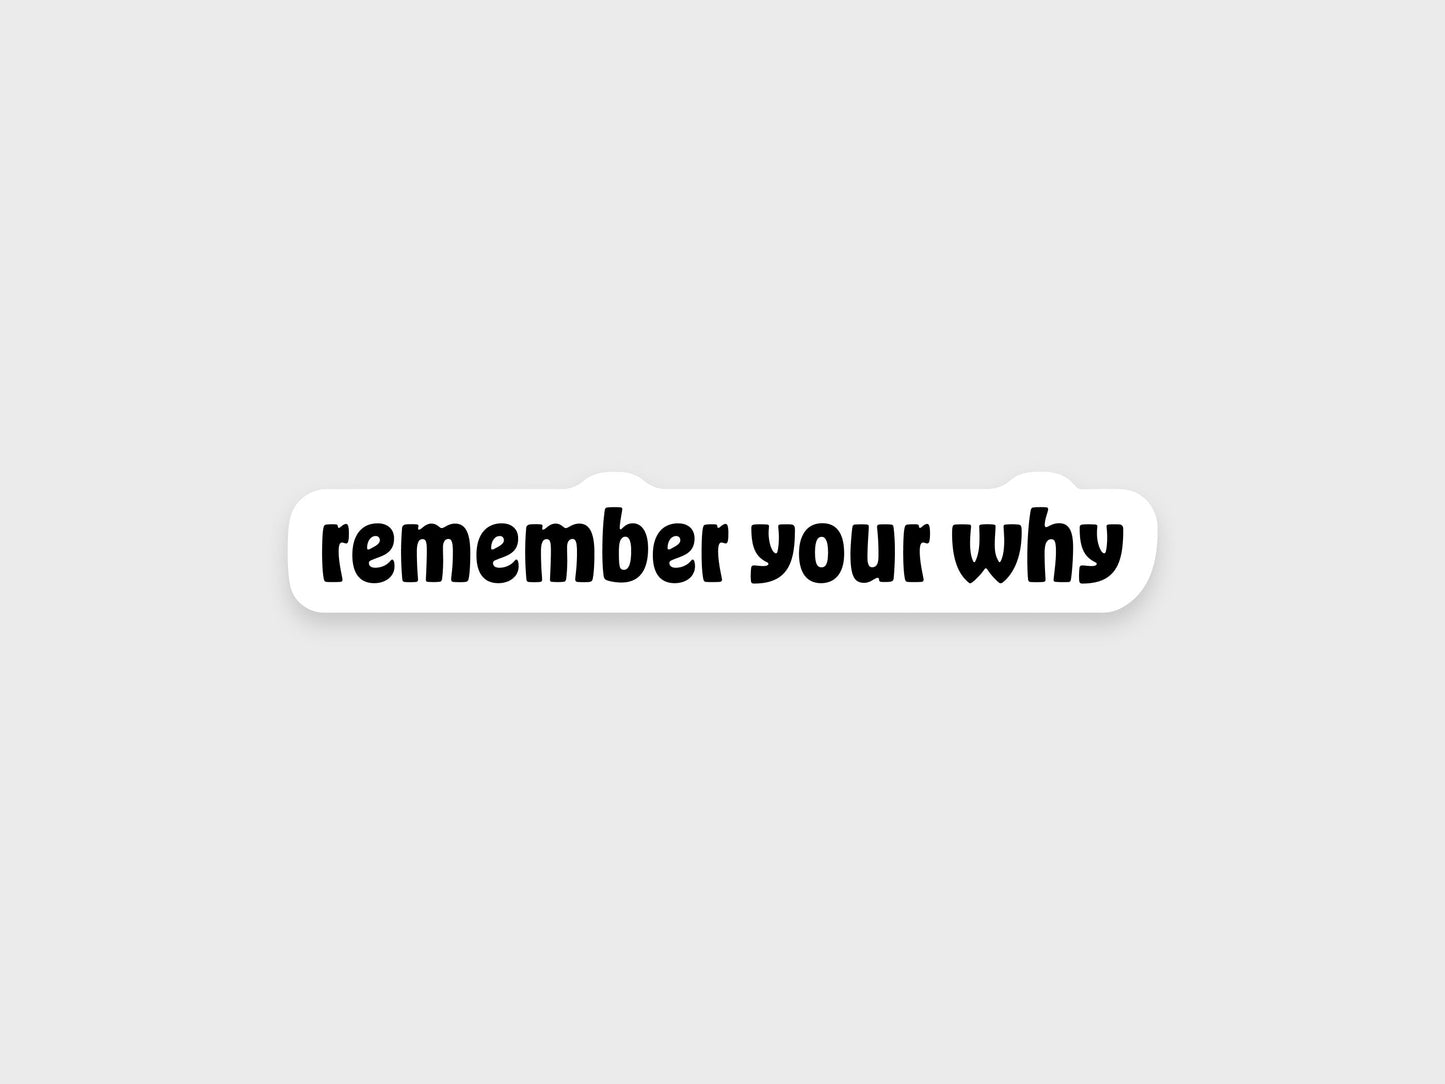 Remember your why